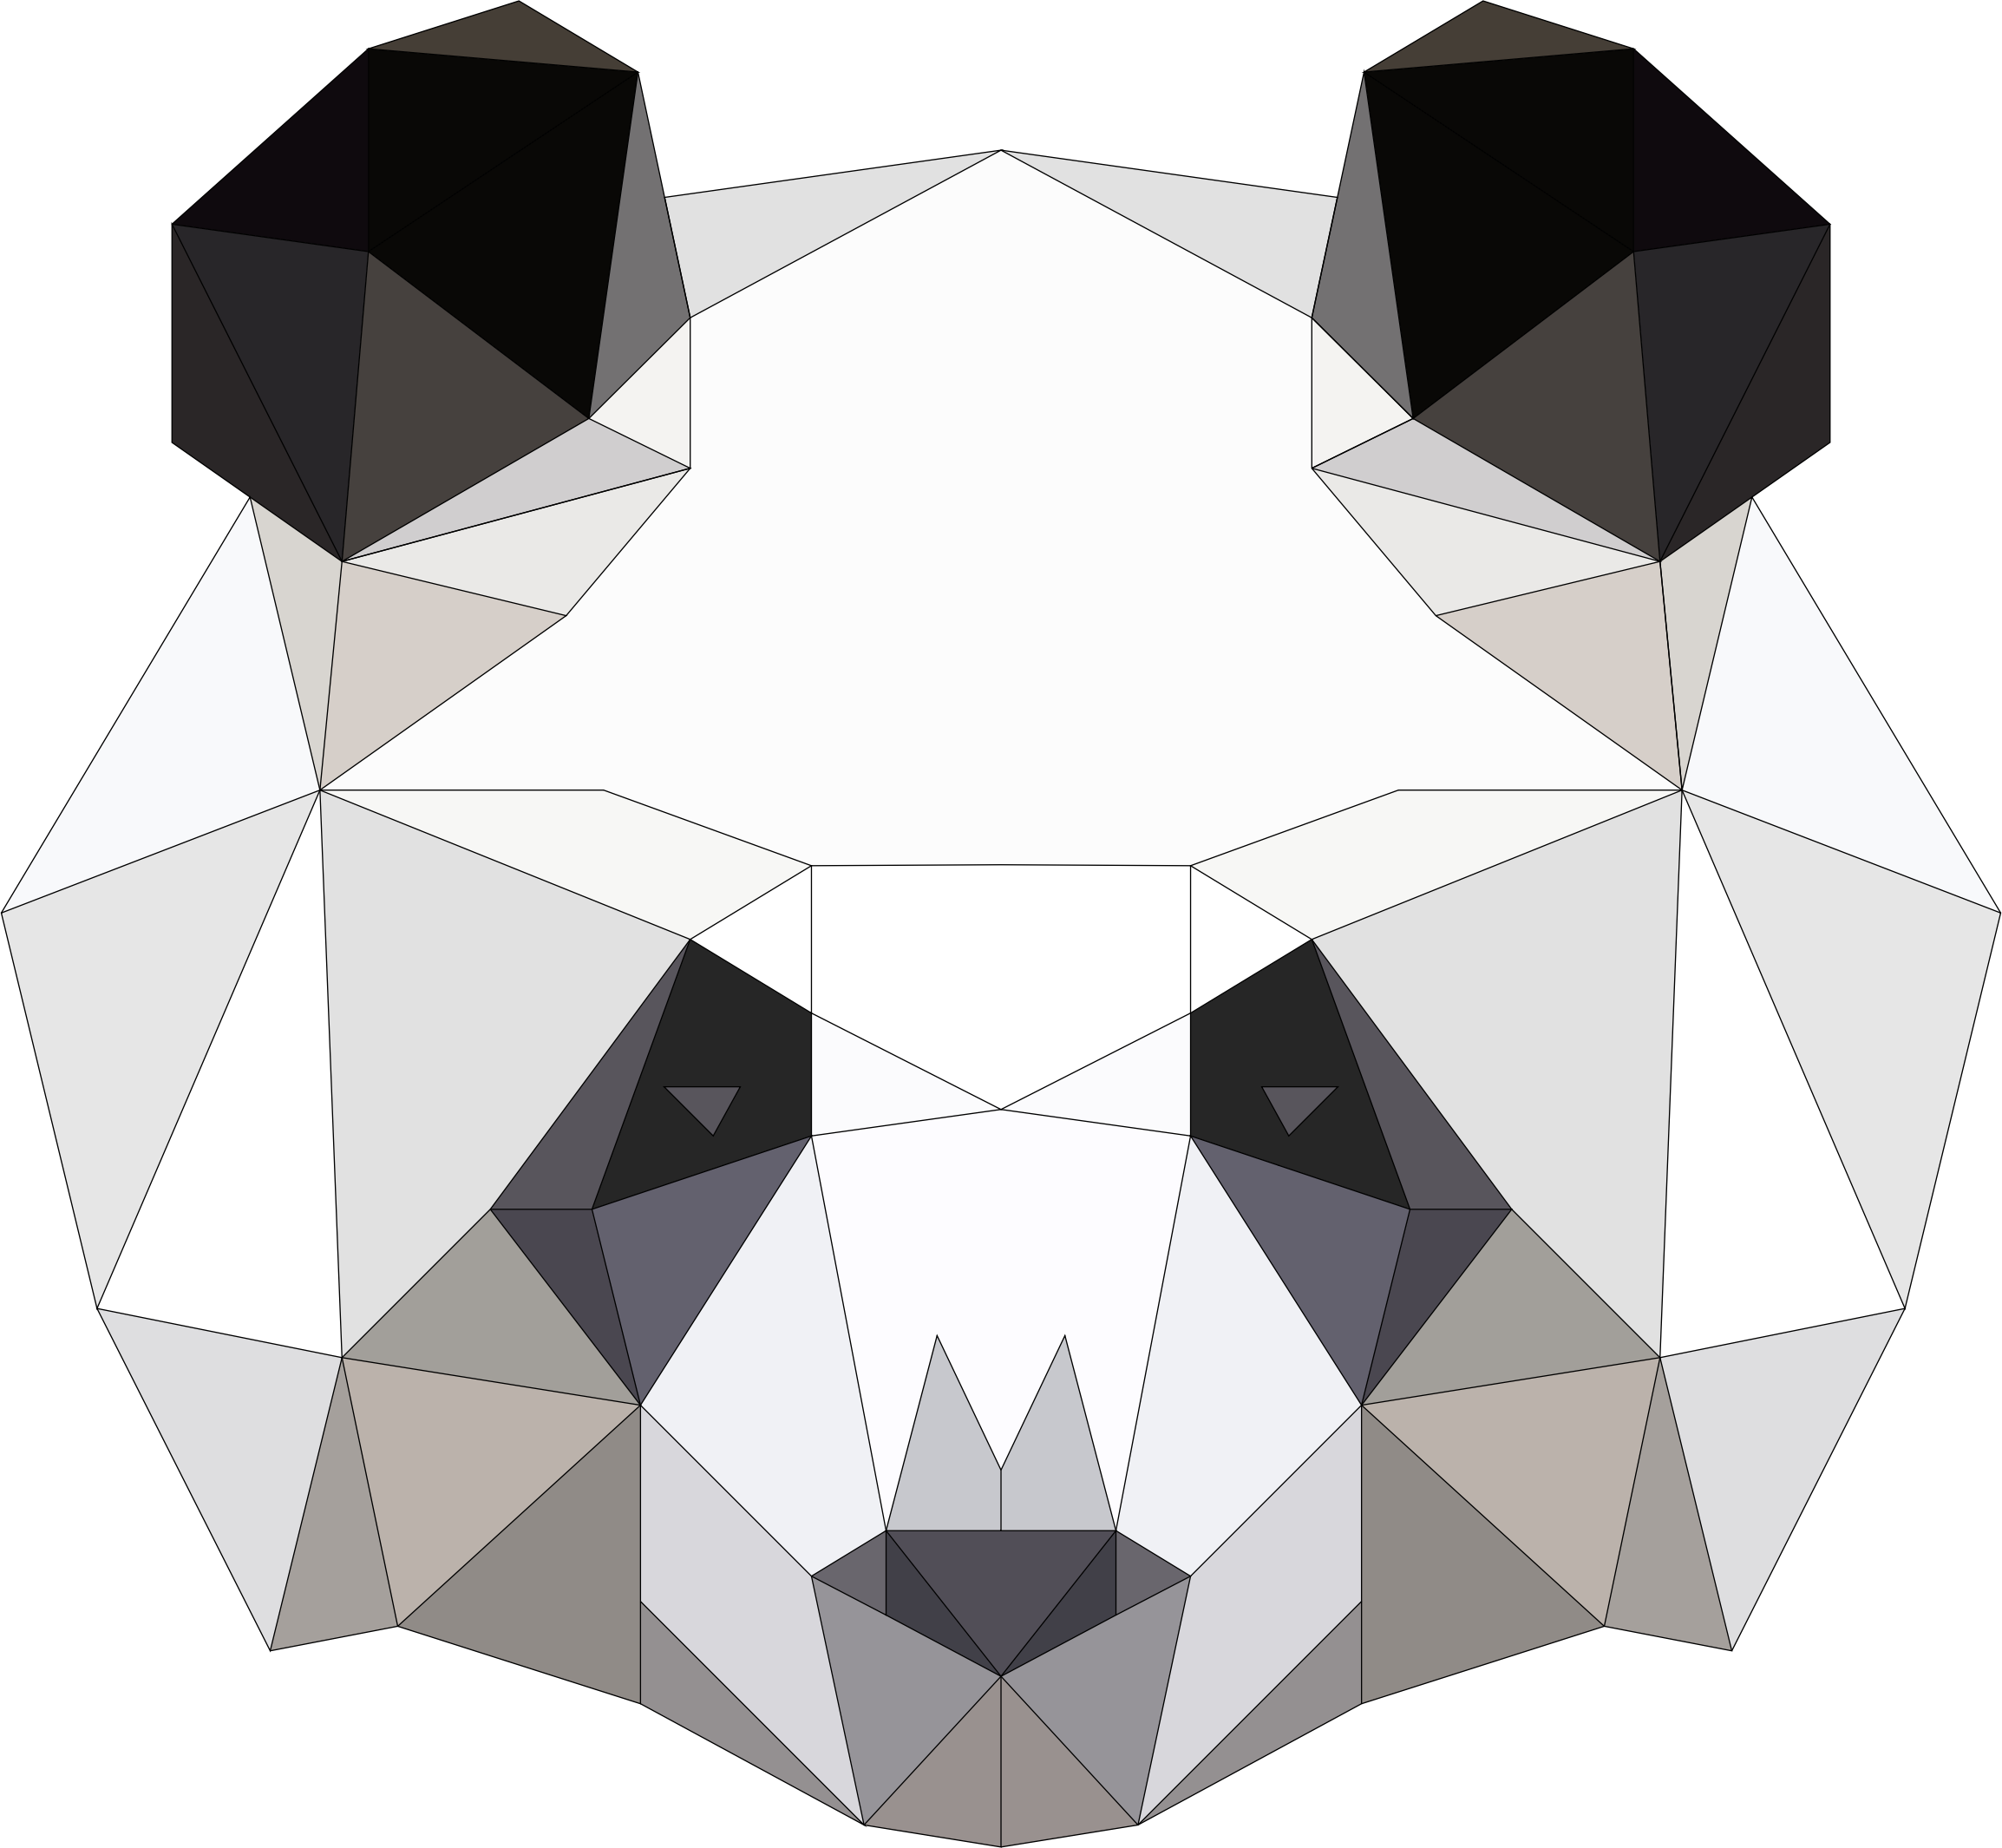 Low poly head with. Panda clipart pattern